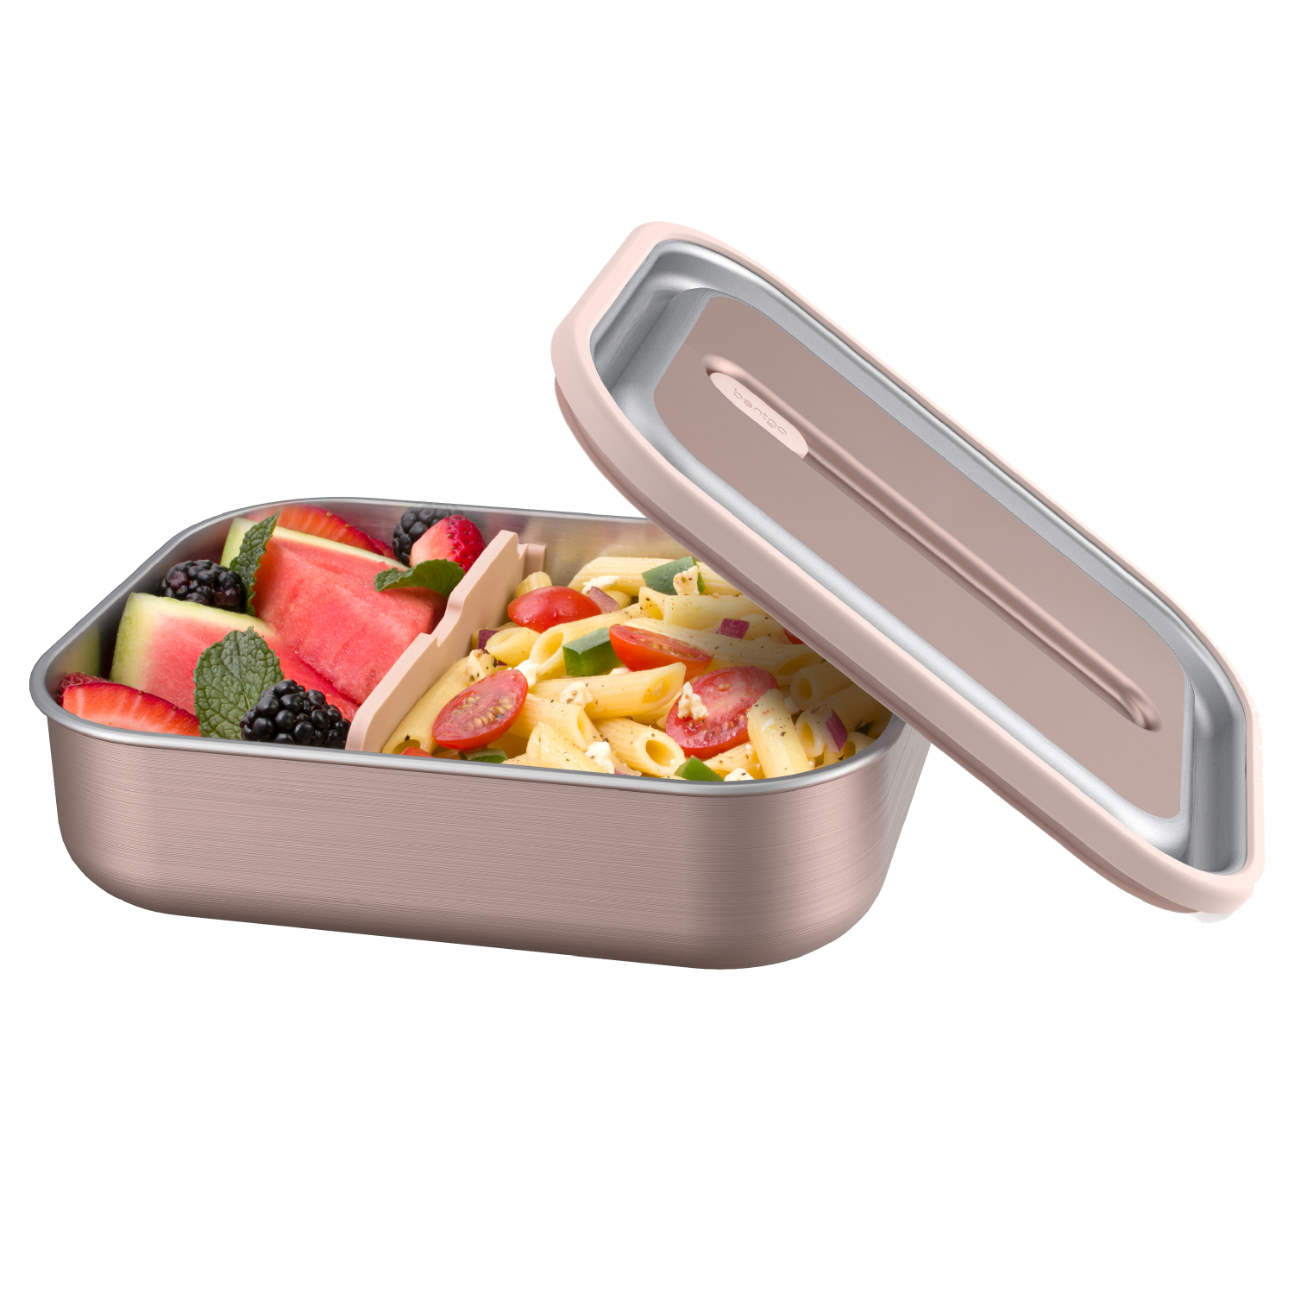 Bentgo Stainless Steel Insulated Food Container 1200ml Rose Gold